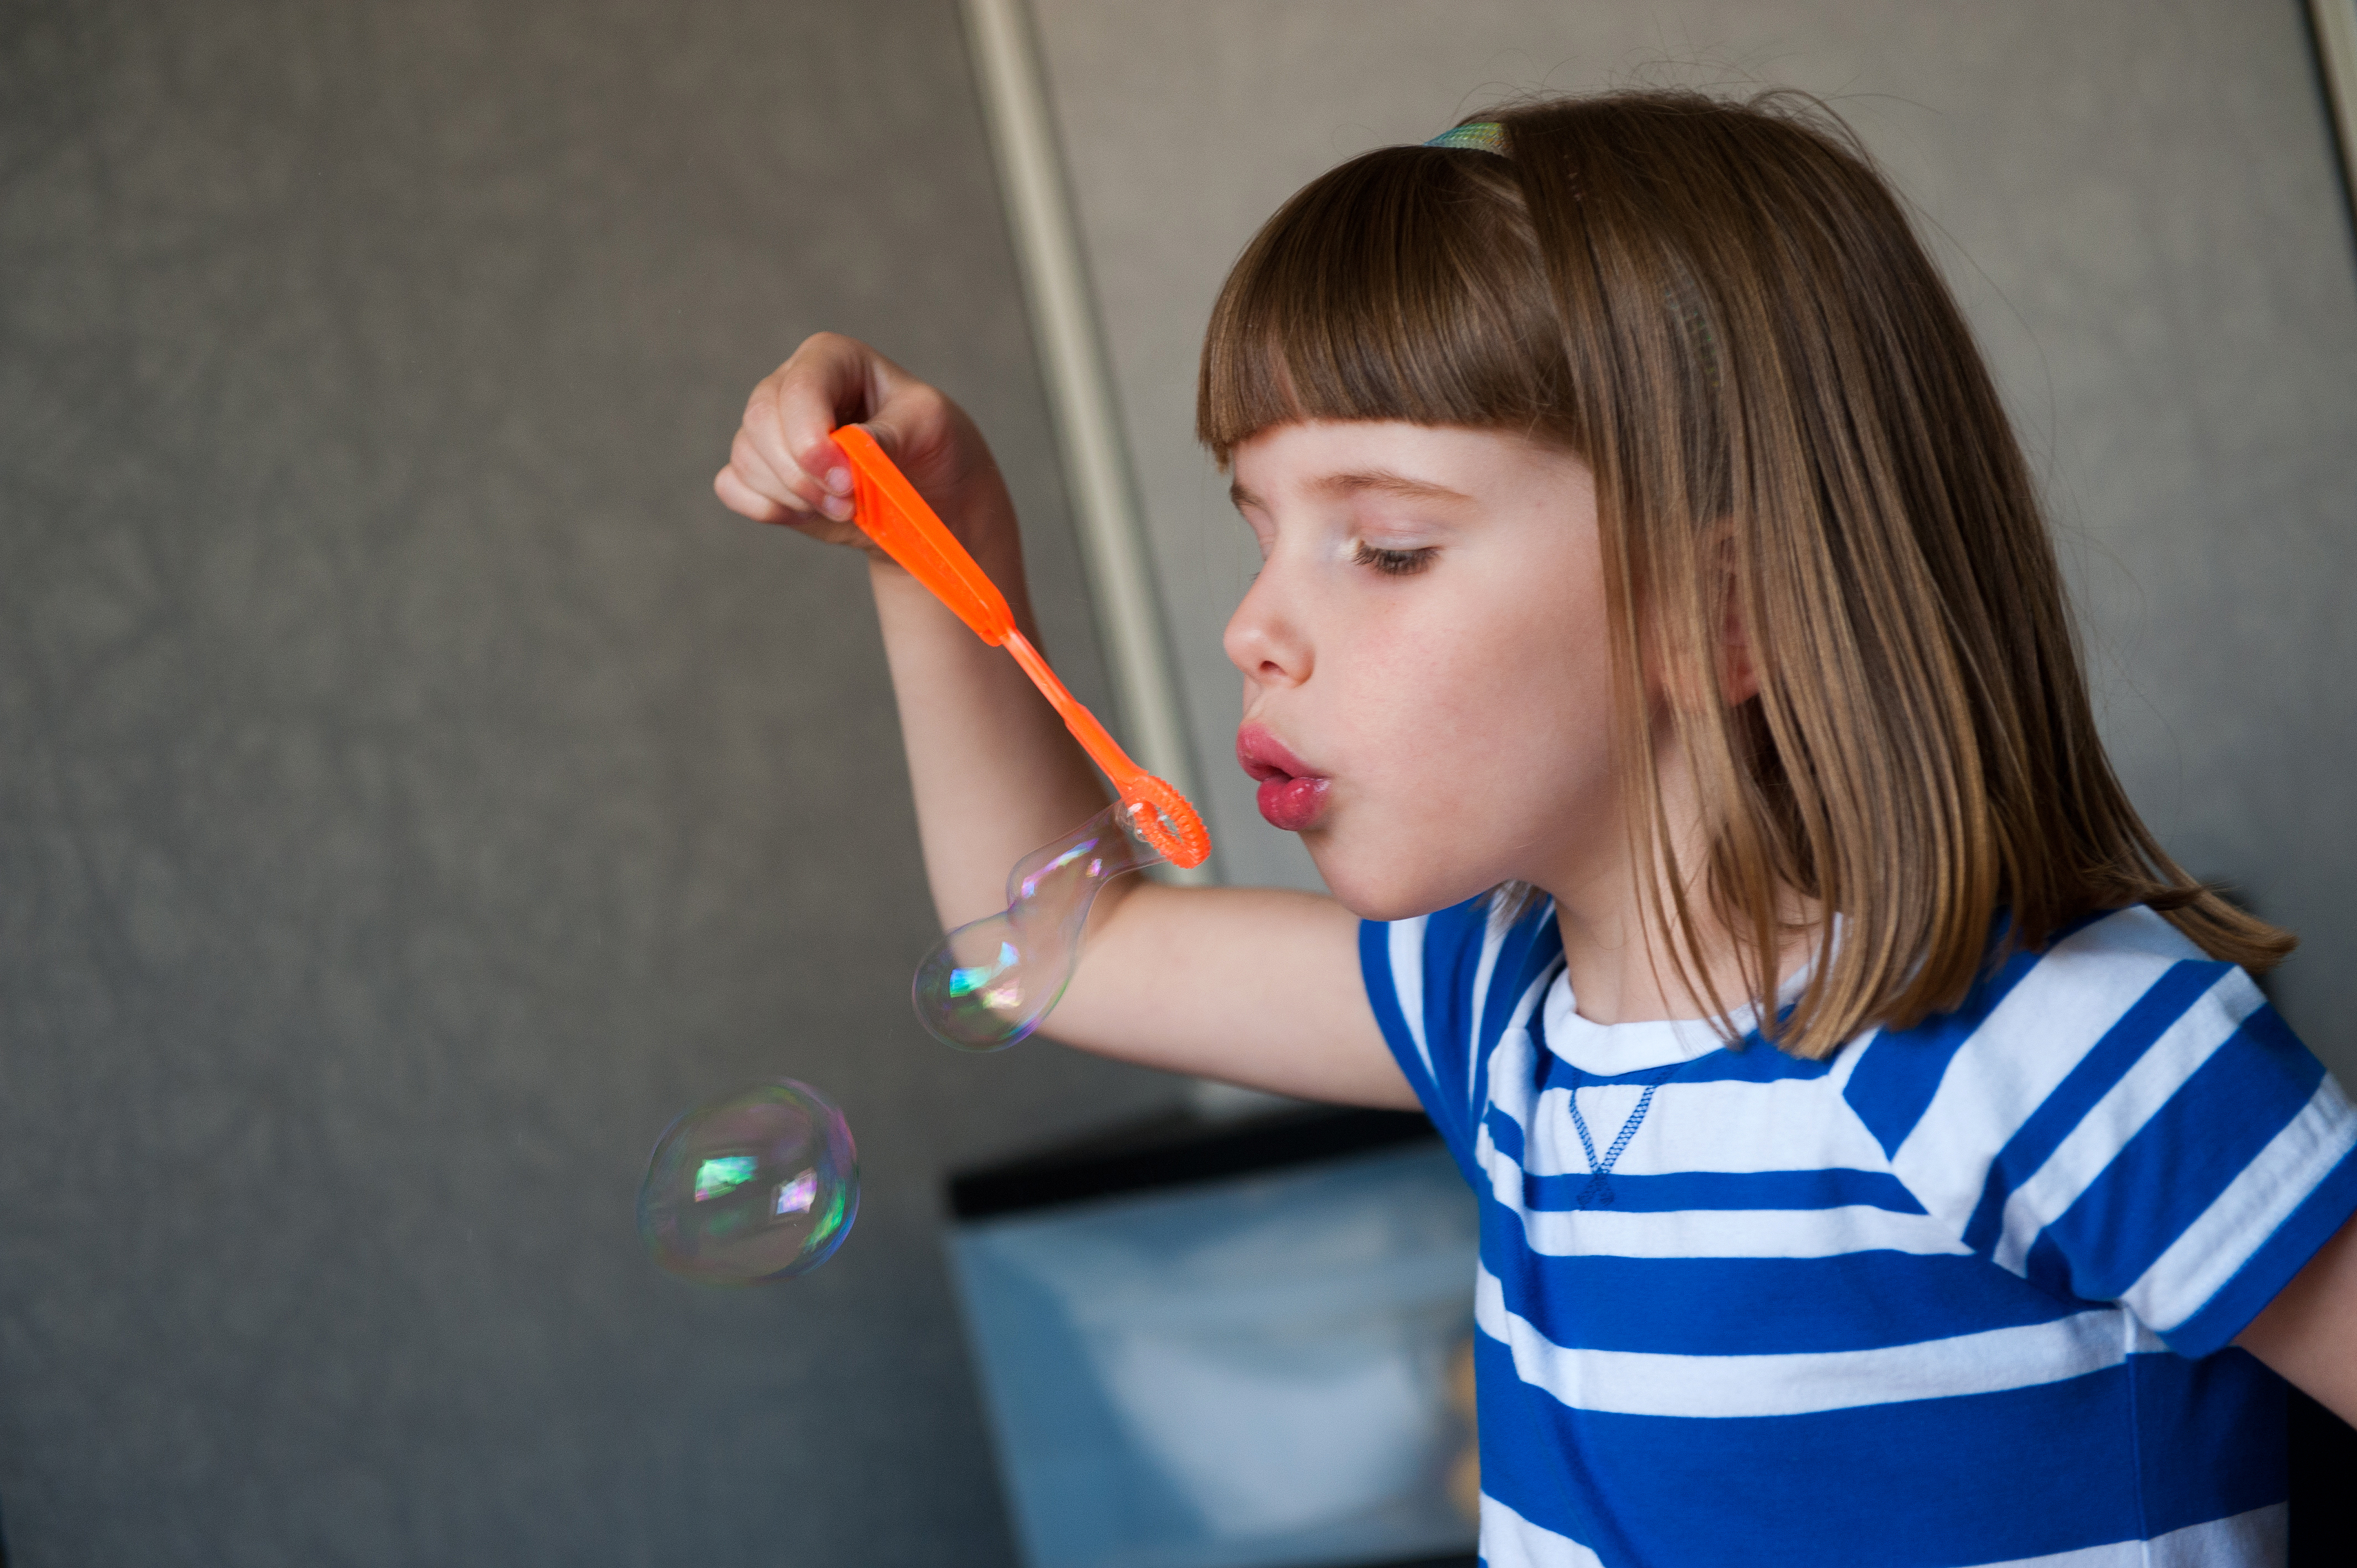 A little girl blows bubbles with an orange bubble wand.